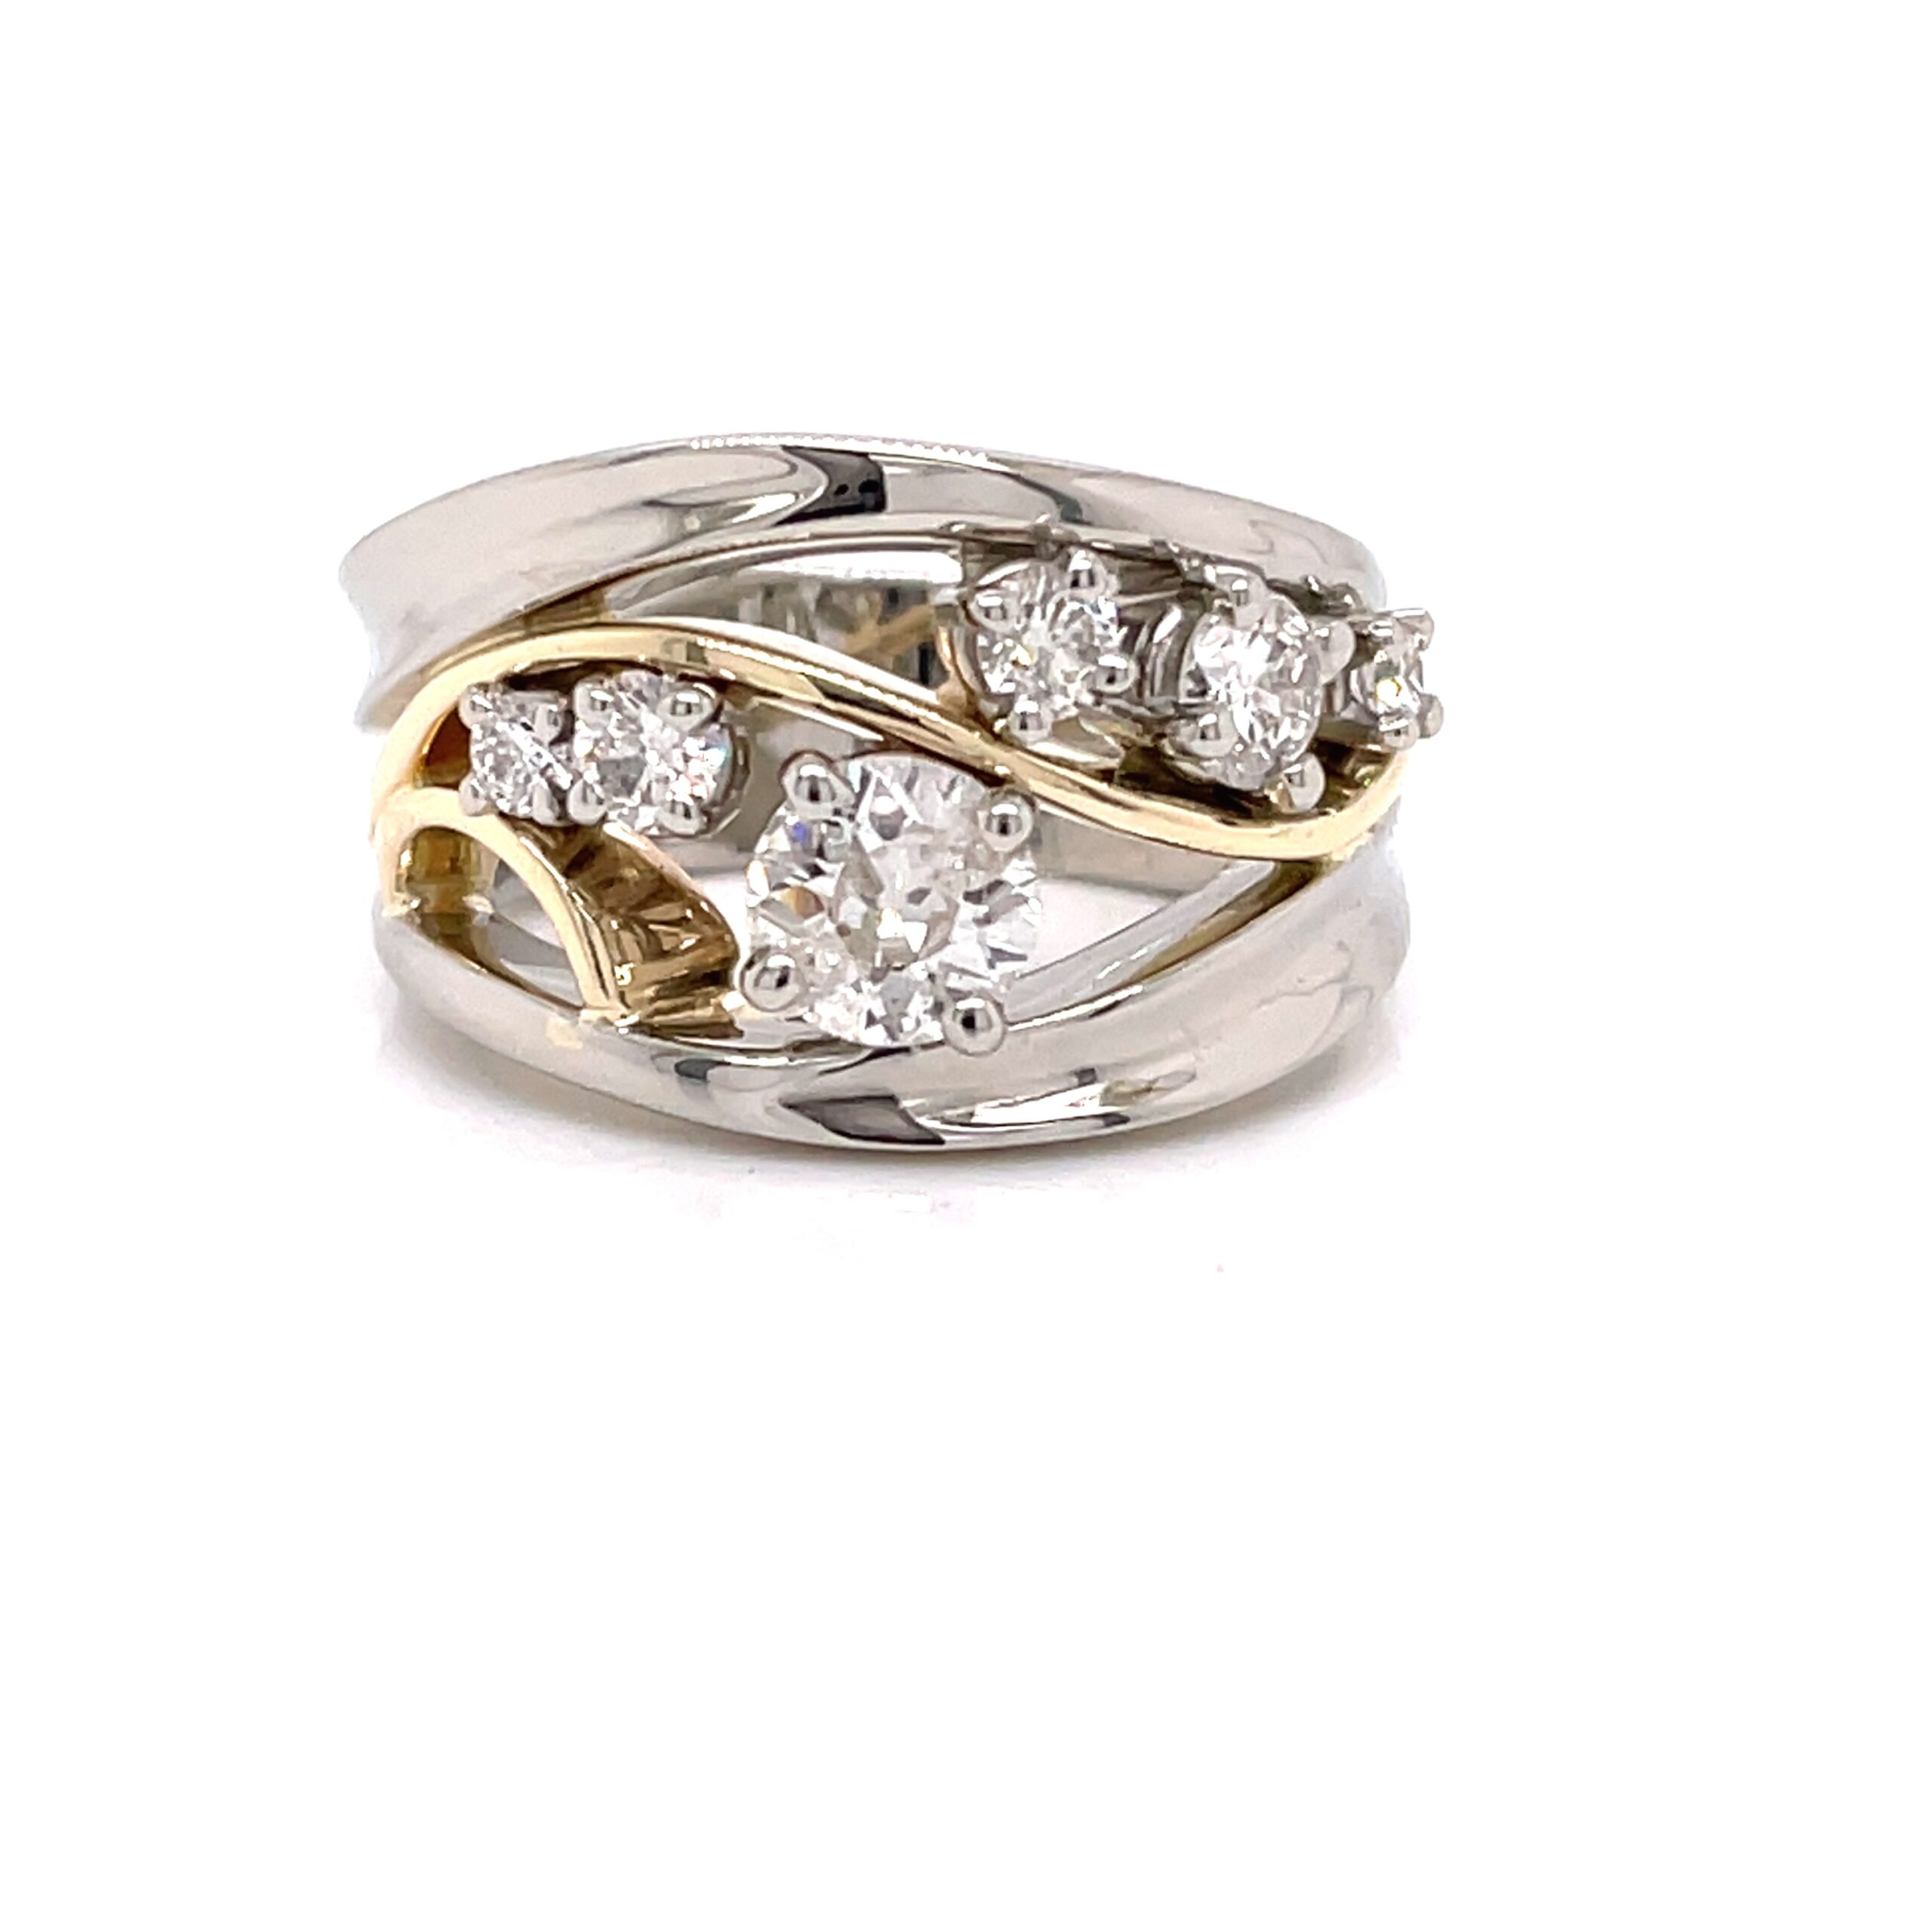 Ring with a distinctive band design. The band is composed of both silver and yellow gold, and it features a round diamonds. The object is set on white background.